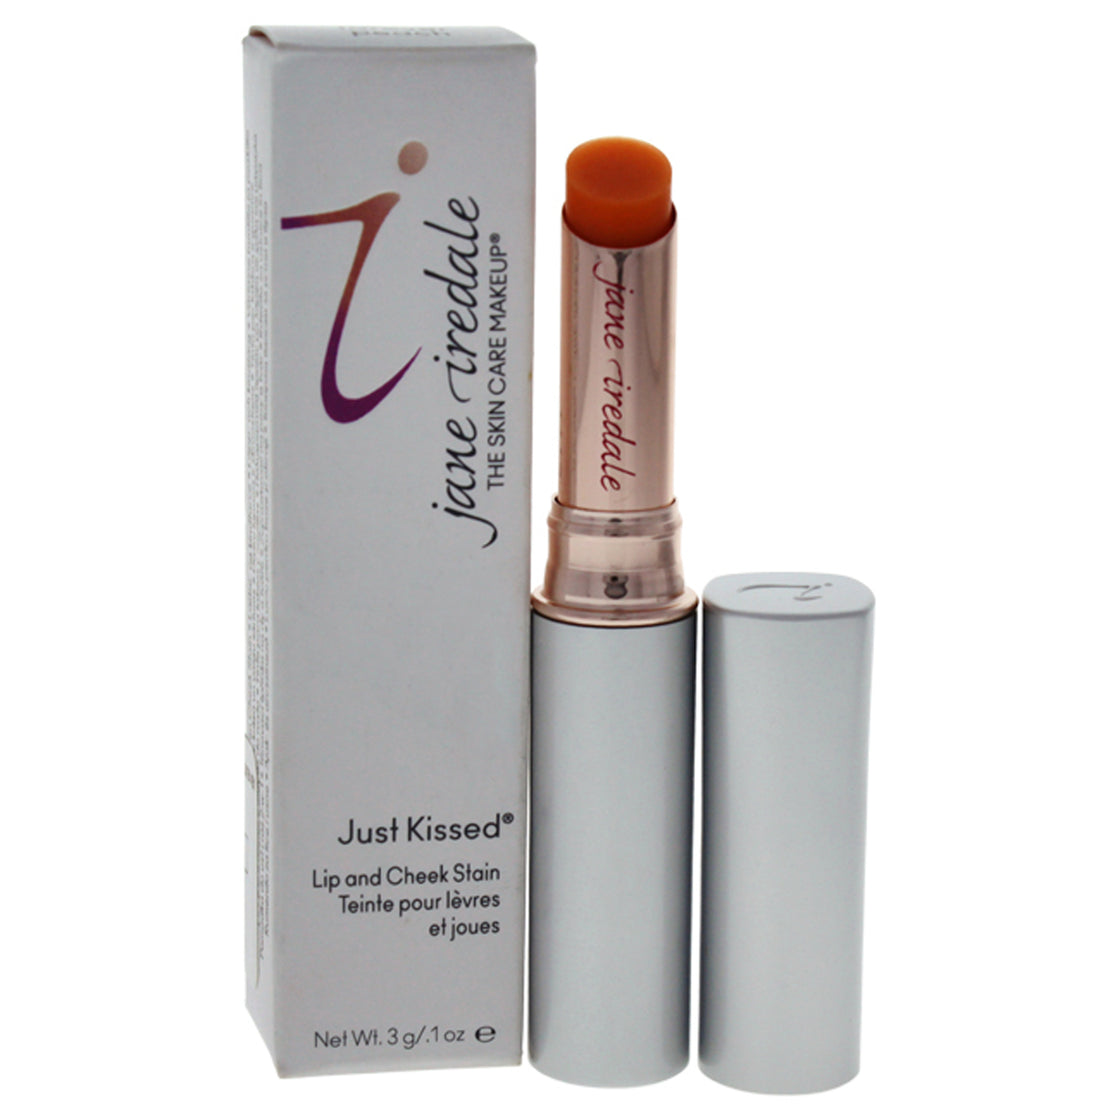 Just Kissed - Forever Peach by Jane Iredale for Women - 0.1 oz Lip & Cheek Stain